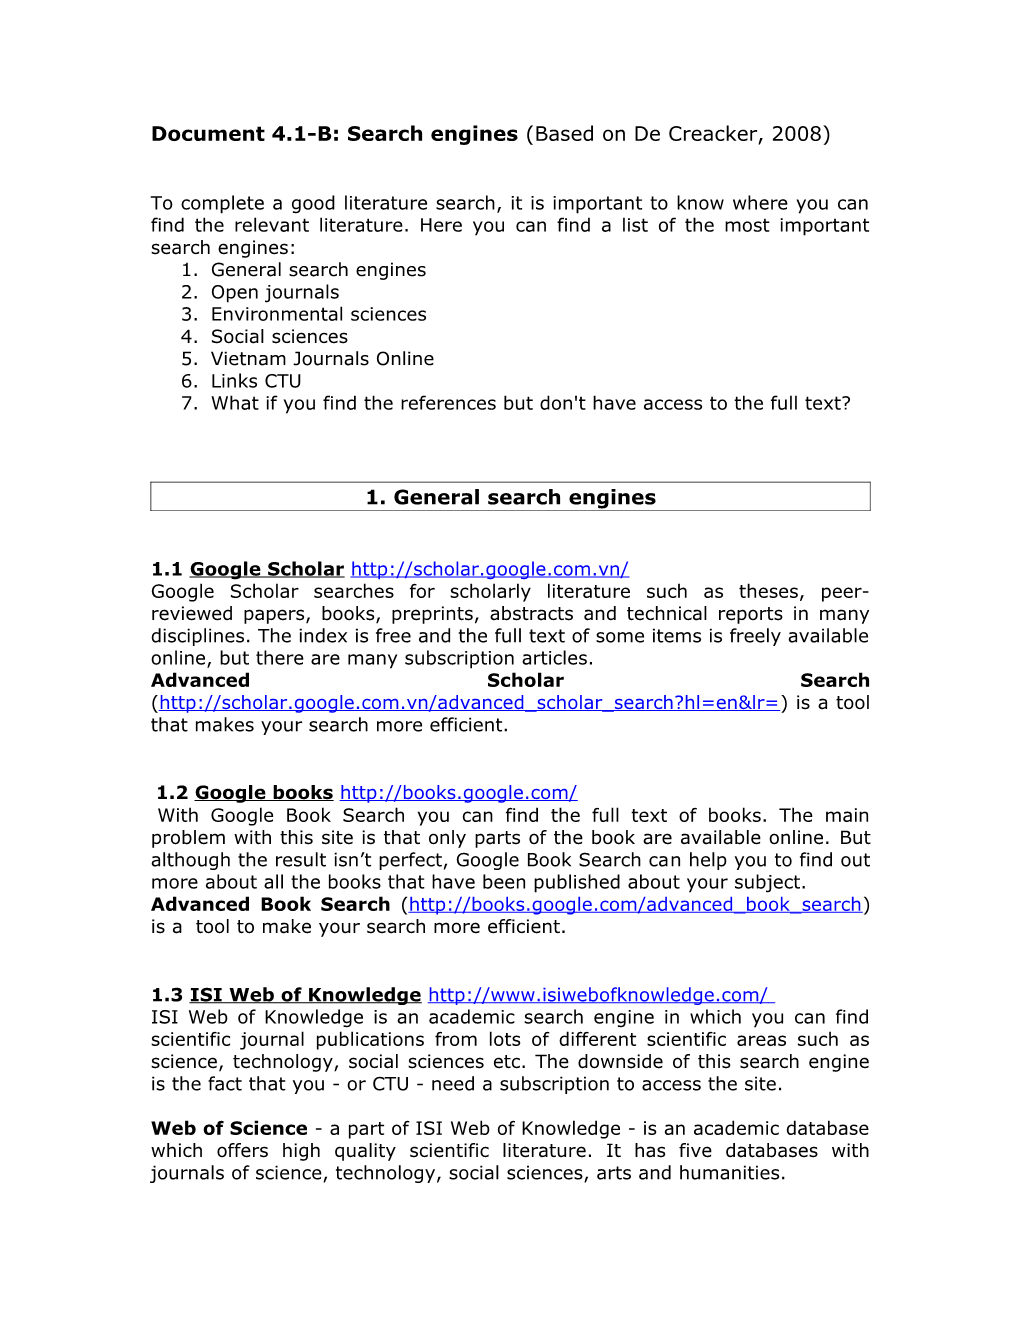 Document 4.1-B: Search Engines (Based on De Creacker, 2008)